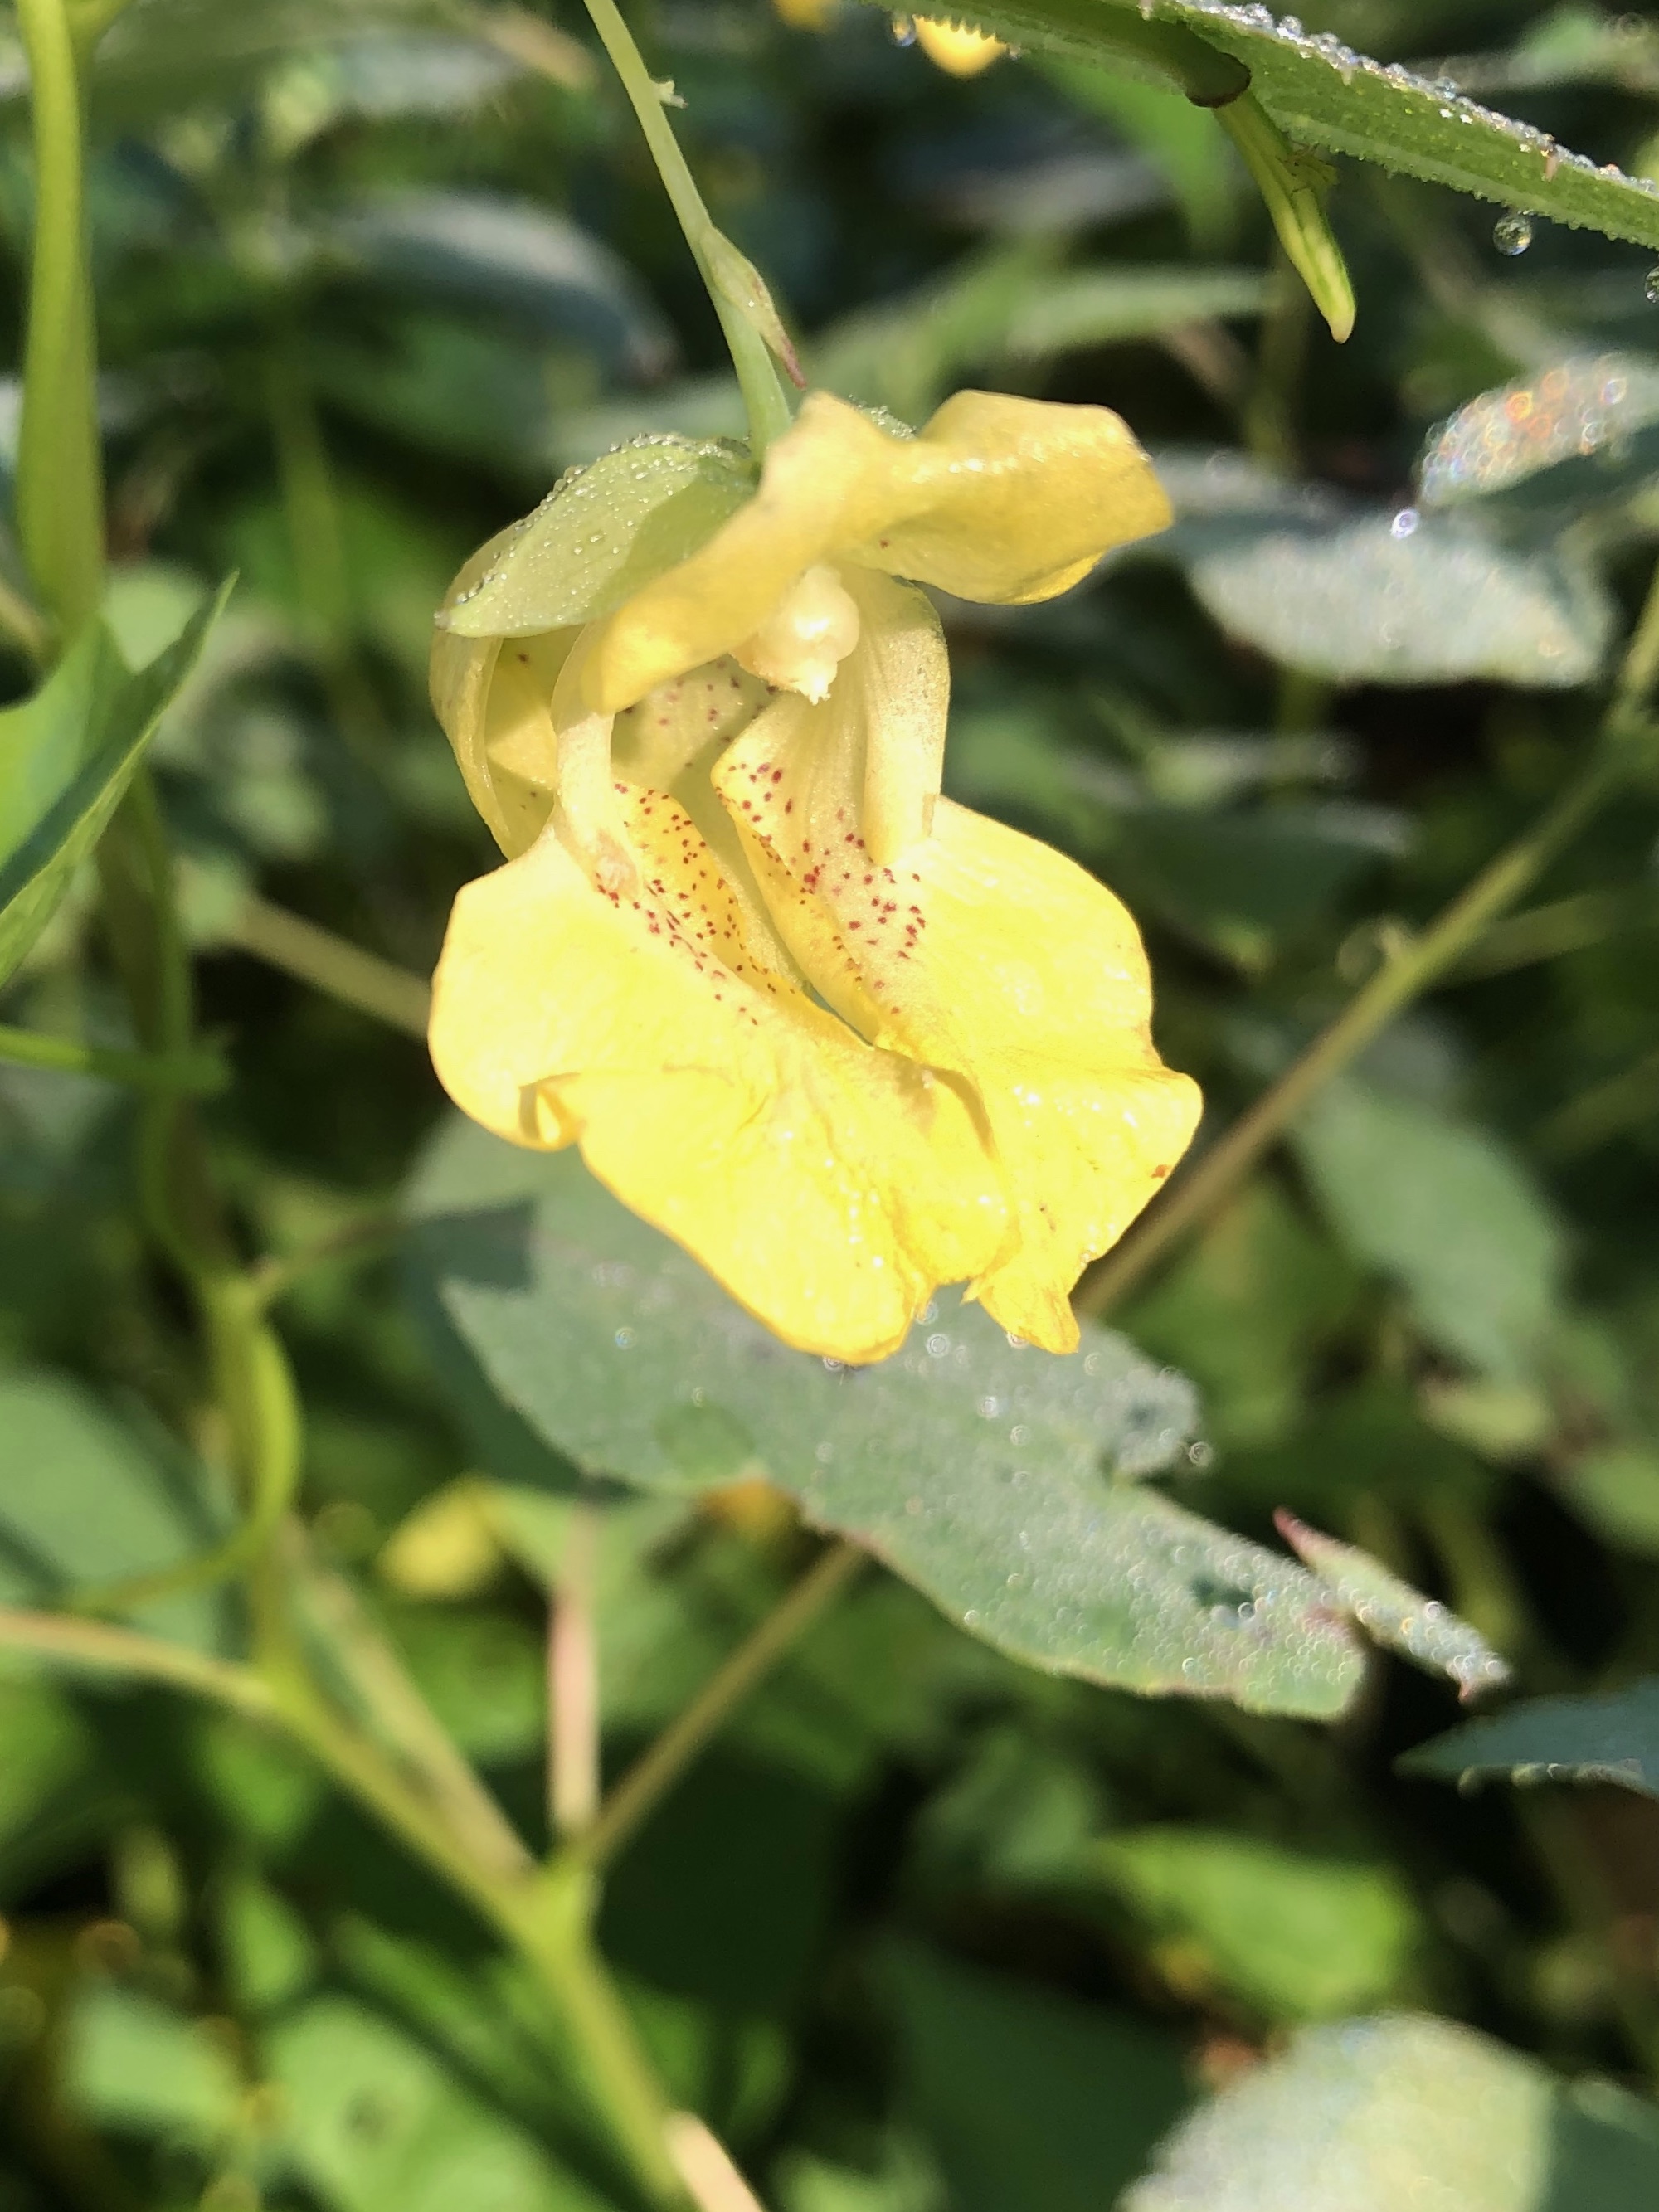 Yellow Jewelweed by Marston Springs on August 12, 2020.